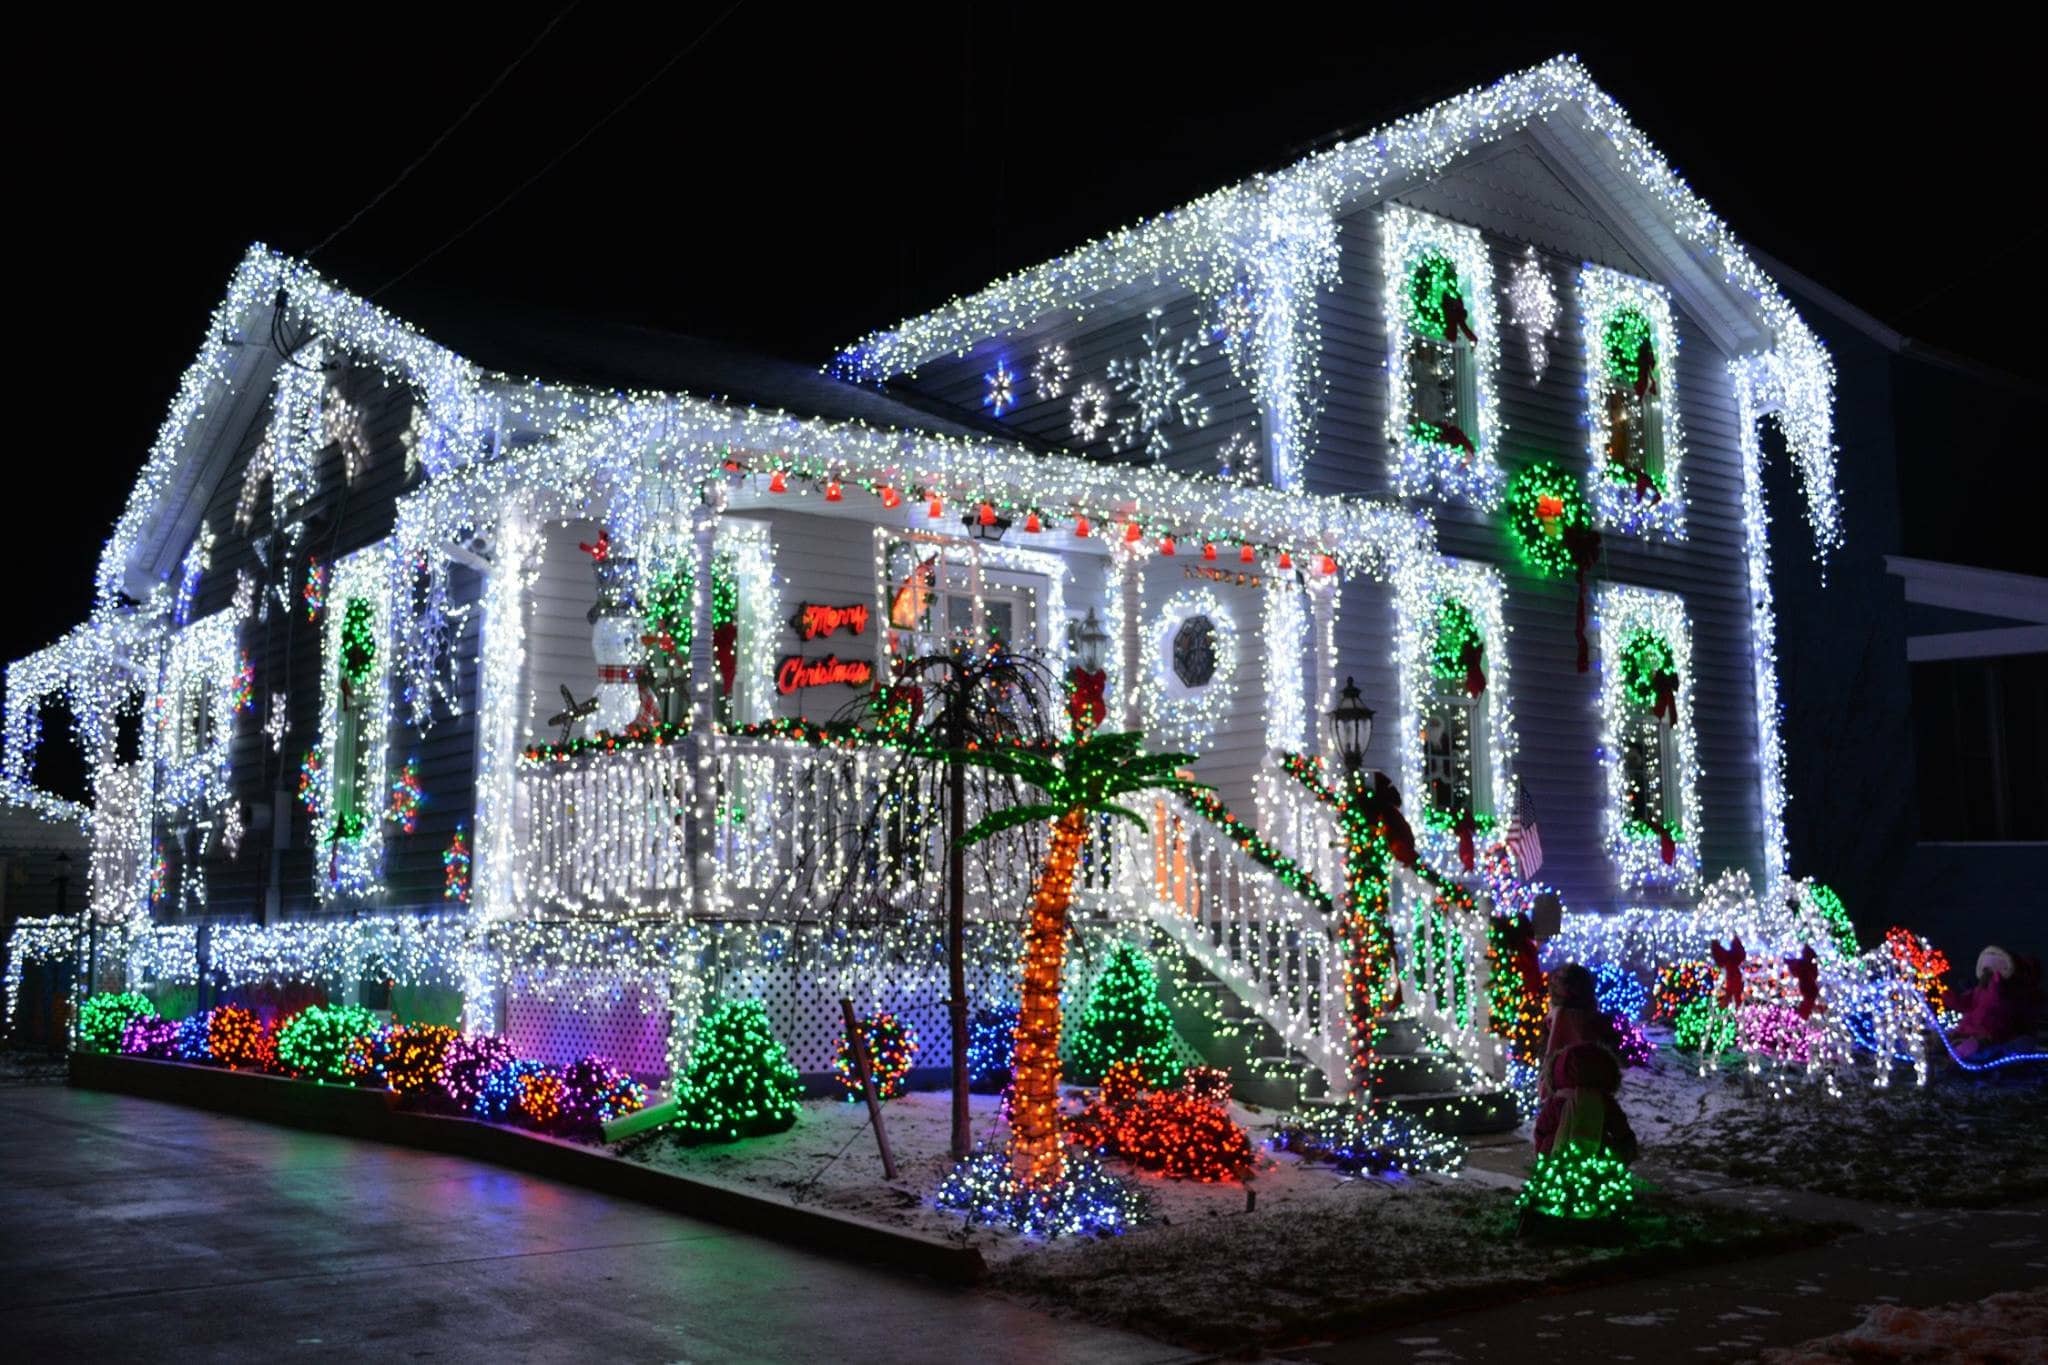 Lockport home dazzles again this year with thousands of lights! A show needed more than ever!!!